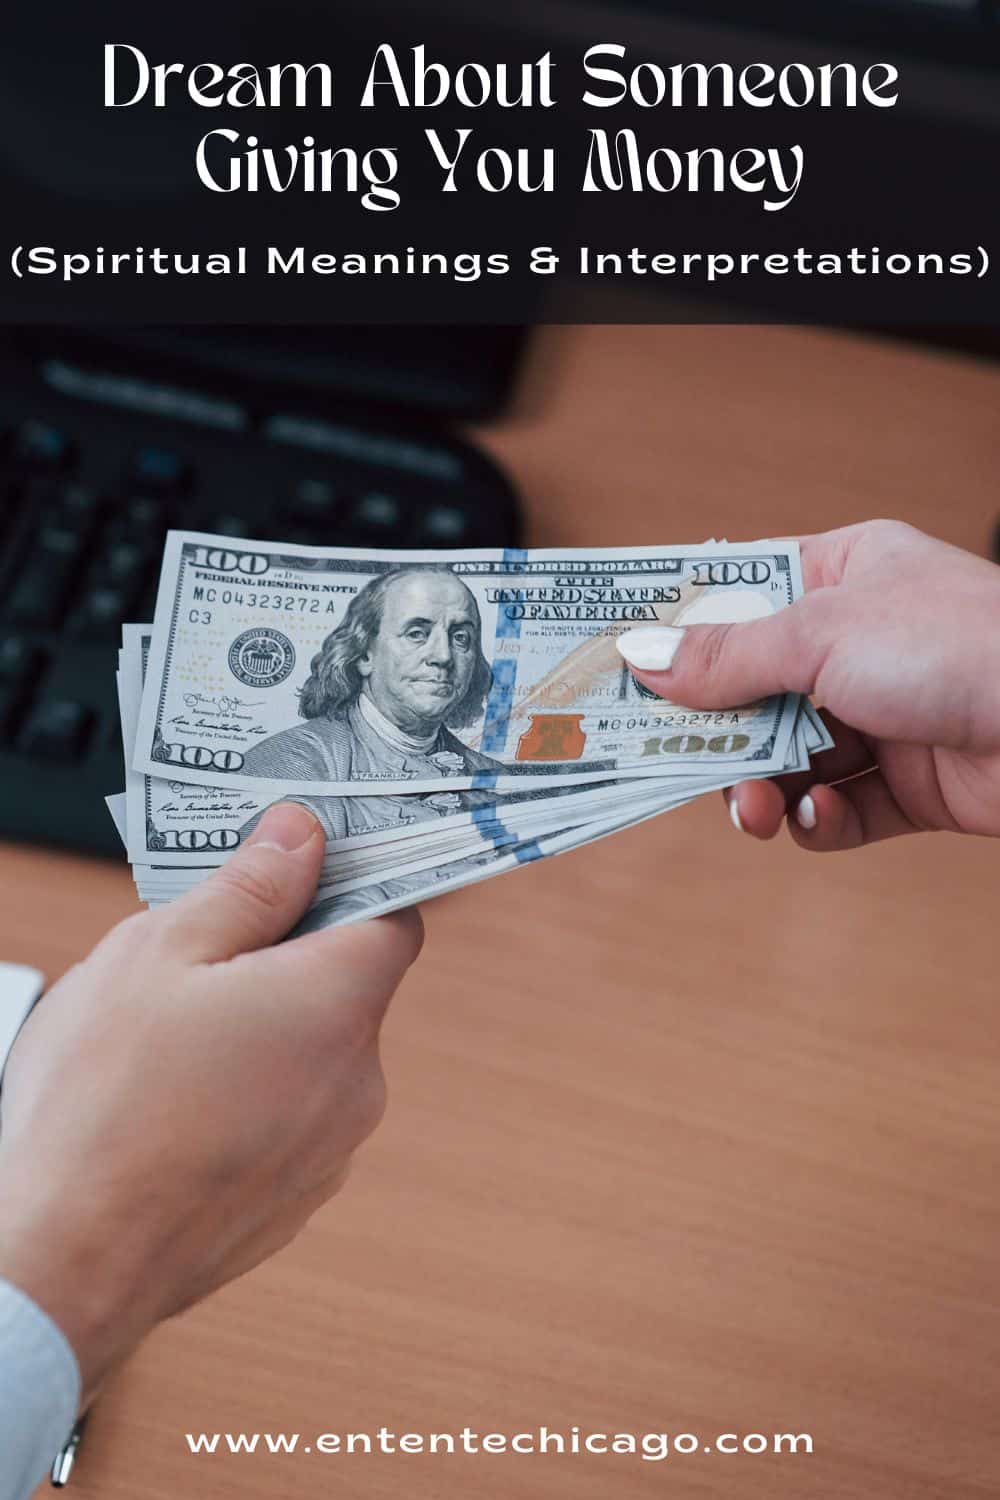 Dream About Someone Giving You Money (Spiritual Meanings & Interpretations)